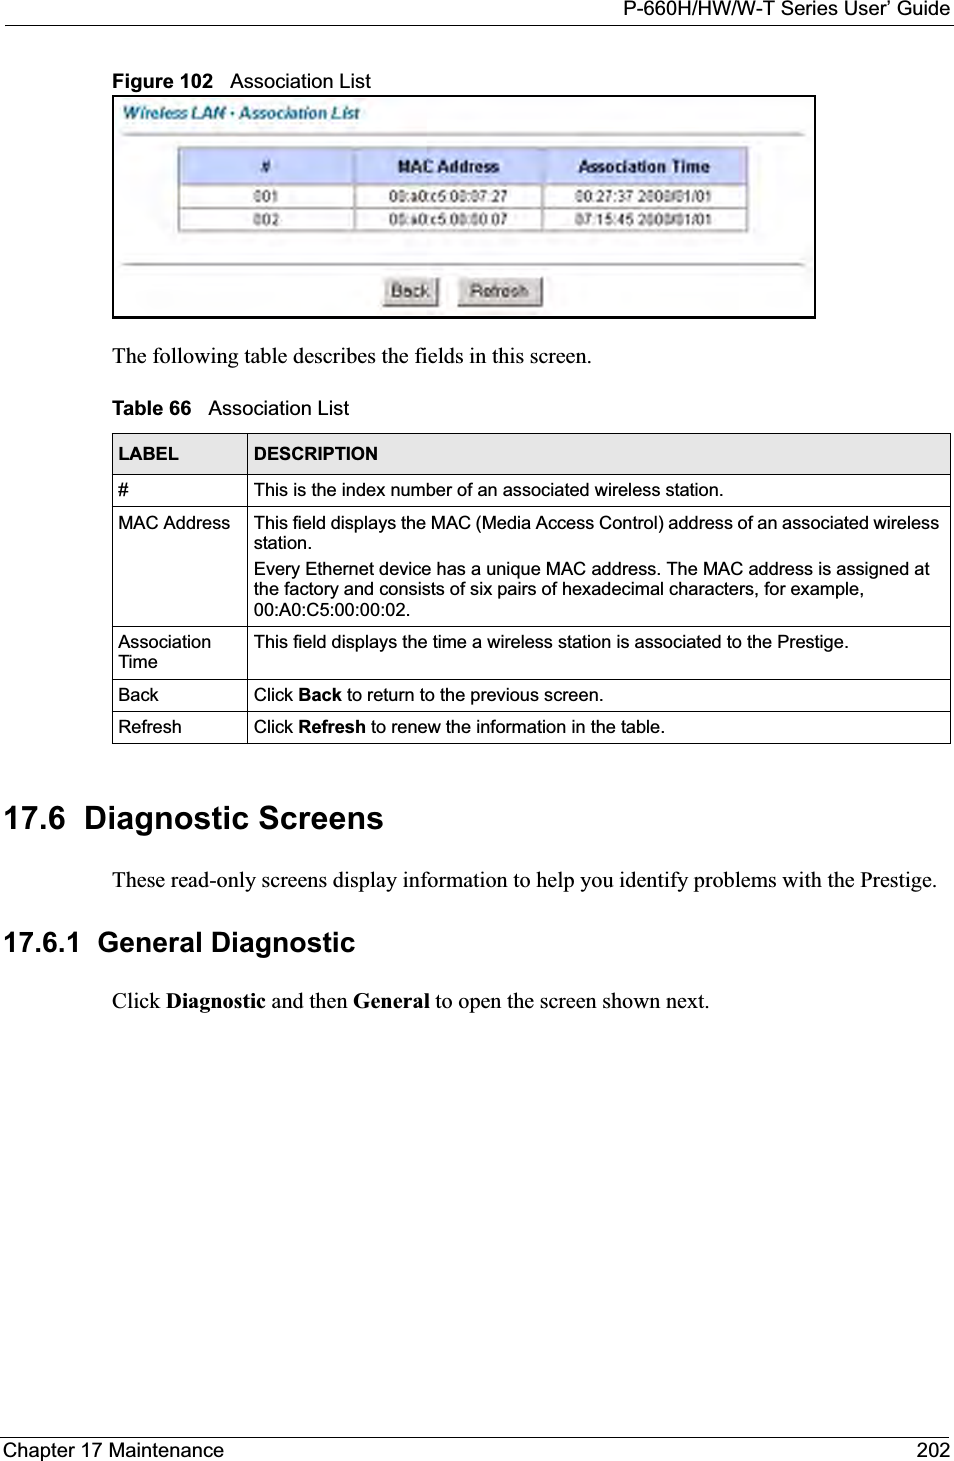 P-660H/HW/W-T Series User’ GuideChapter 17 Maintenance 202Figure 102   Association ListThe following table describes the fields in this screen.  17.6  Diagnostic ScreensThese read-only screens display information to help you identify problems with the Prestige.17.6.1  General DiagnosticClick Diagnostic and then General to open the screen shown next.Table 66   Association ListLABEL DESCRIPTION#This is the index number of an associated wireless station.MAC Address  This field displays the MAC (Media Access Control) address of an associated wireless station.Every Ethernet device has a unique MAC address. The MAC address is assigned at the factory and consists of six pairs of hexadecimal characters, for example, 00:A0:C5:00:00:02.AssociationTimeThis field displays the time a wireless station is associated to the Prestige. Back Click Back to return to the previous screen.Refresh Click Refresh to renew the information in the table.